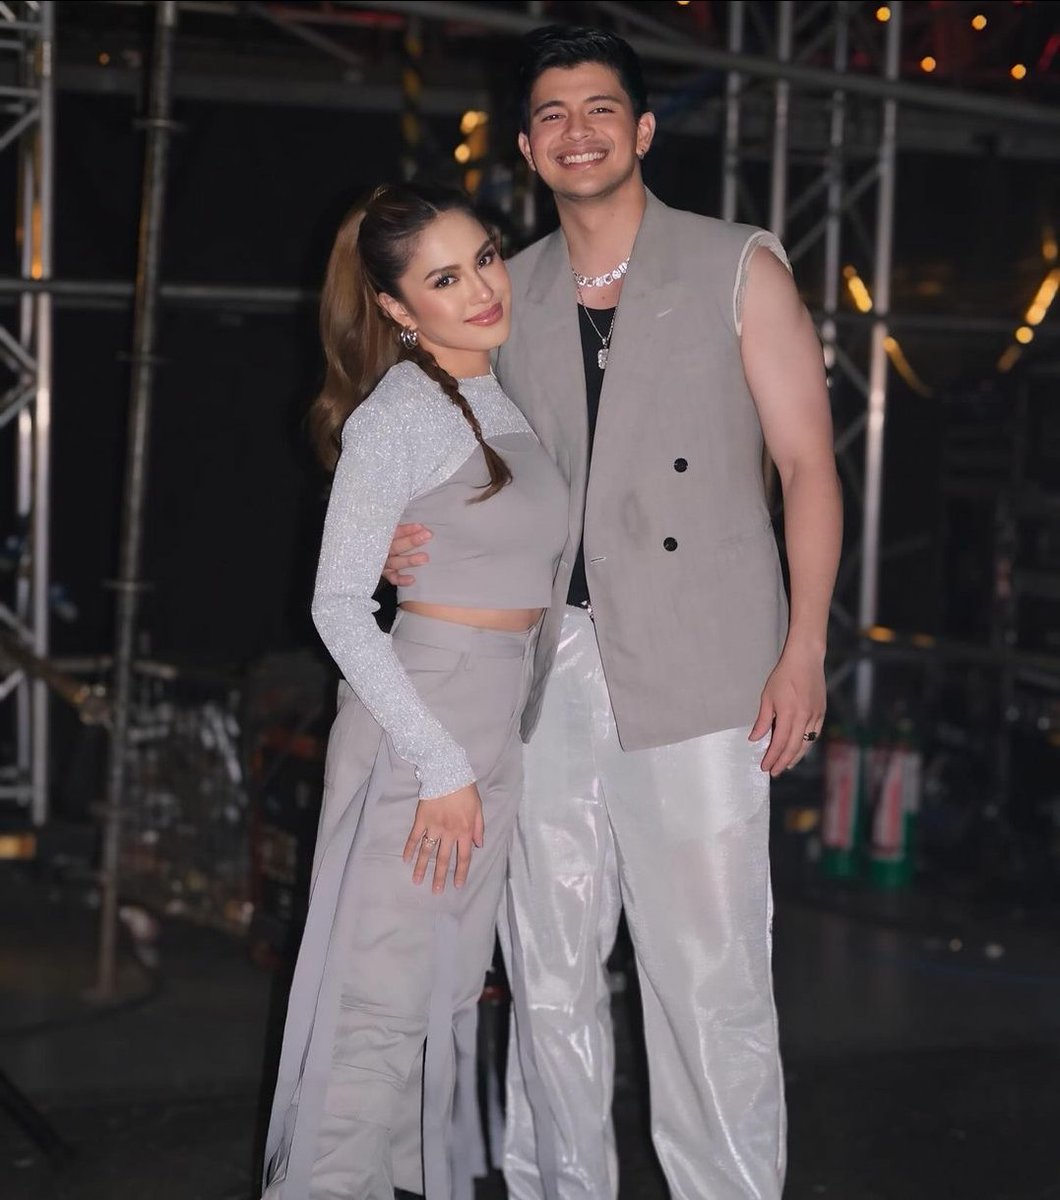 JulieVer performed last night at #PureEnergyOneLastTime ! Catch them this August and September for #SparkleWorldTour in the US and Japan! Only ALL OUT performances from this talented couple! @MyJaps @RAYVERCRUZ20 IG: sparklegmaartistcenter